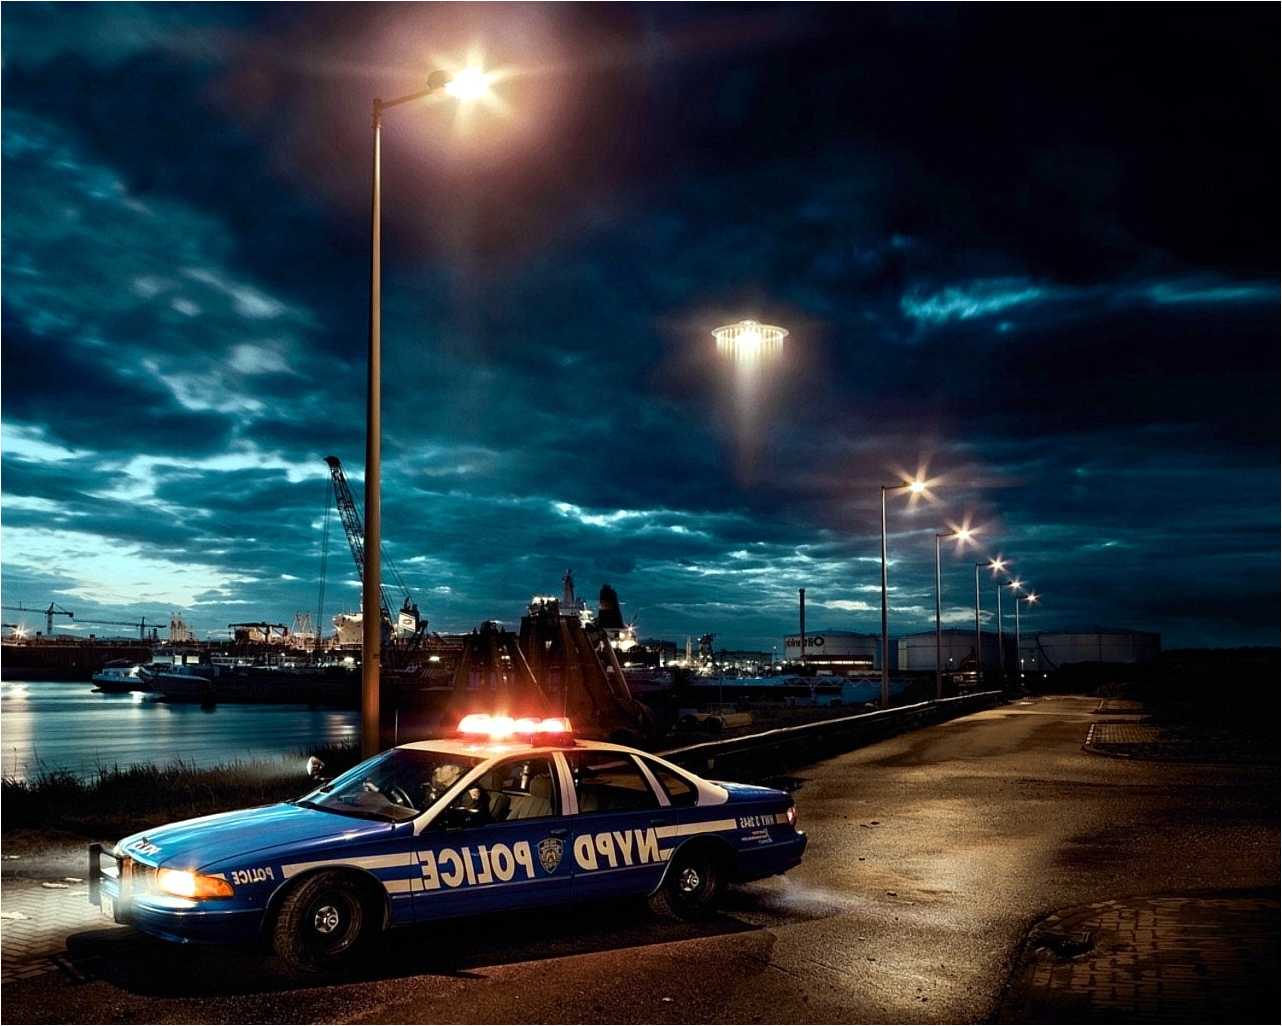 Police Wallpaper. Free Photo Download For Android, DesktopK